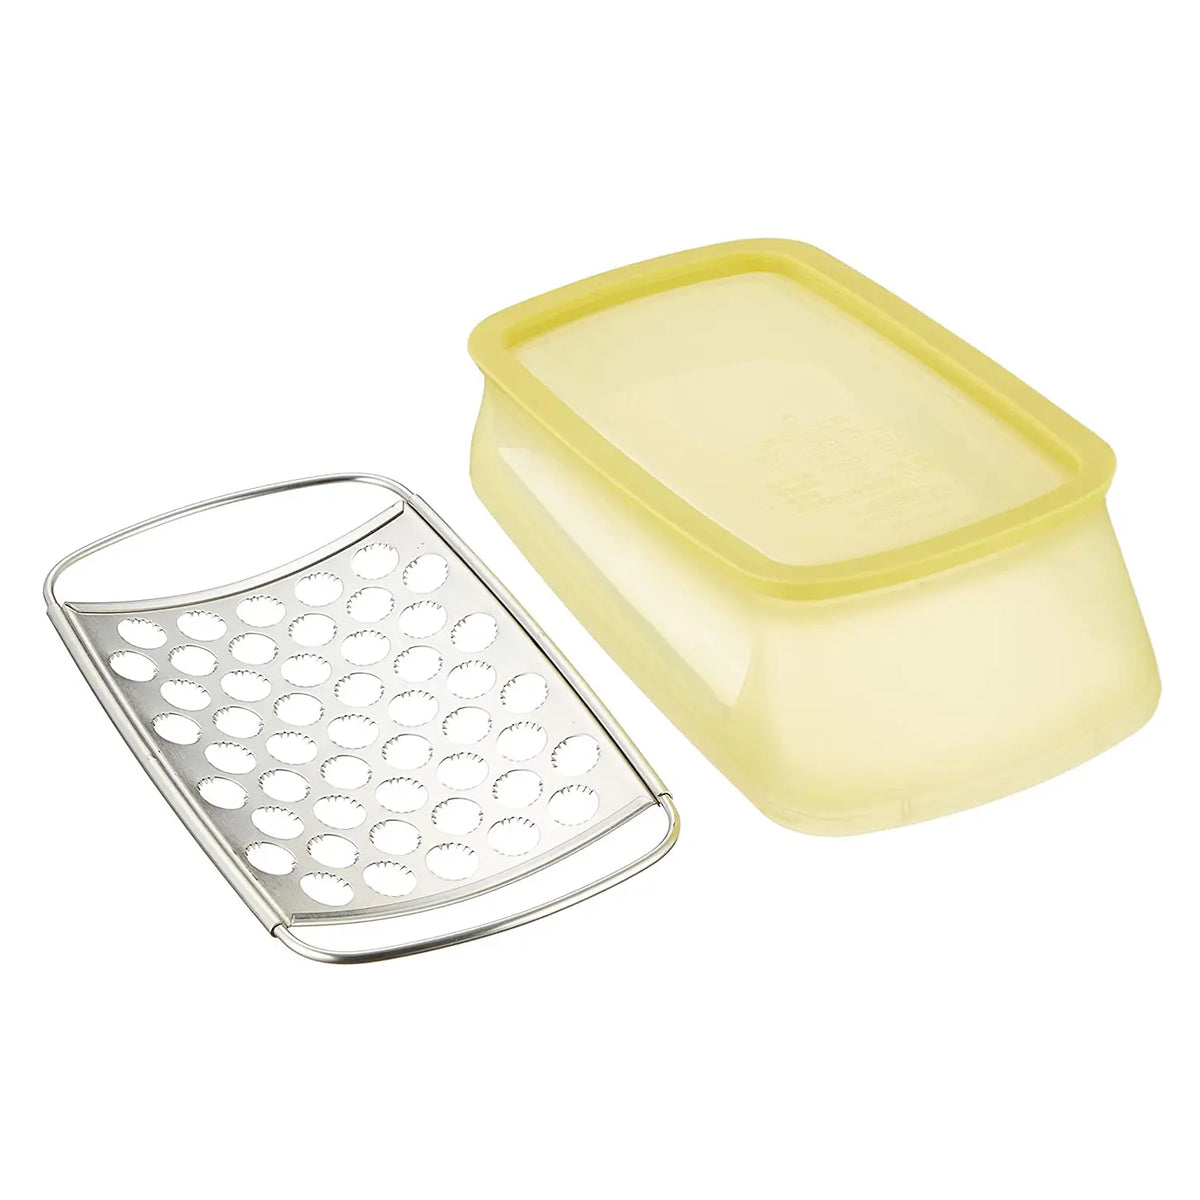 Shinkousha Stainless Steel Grater with Container